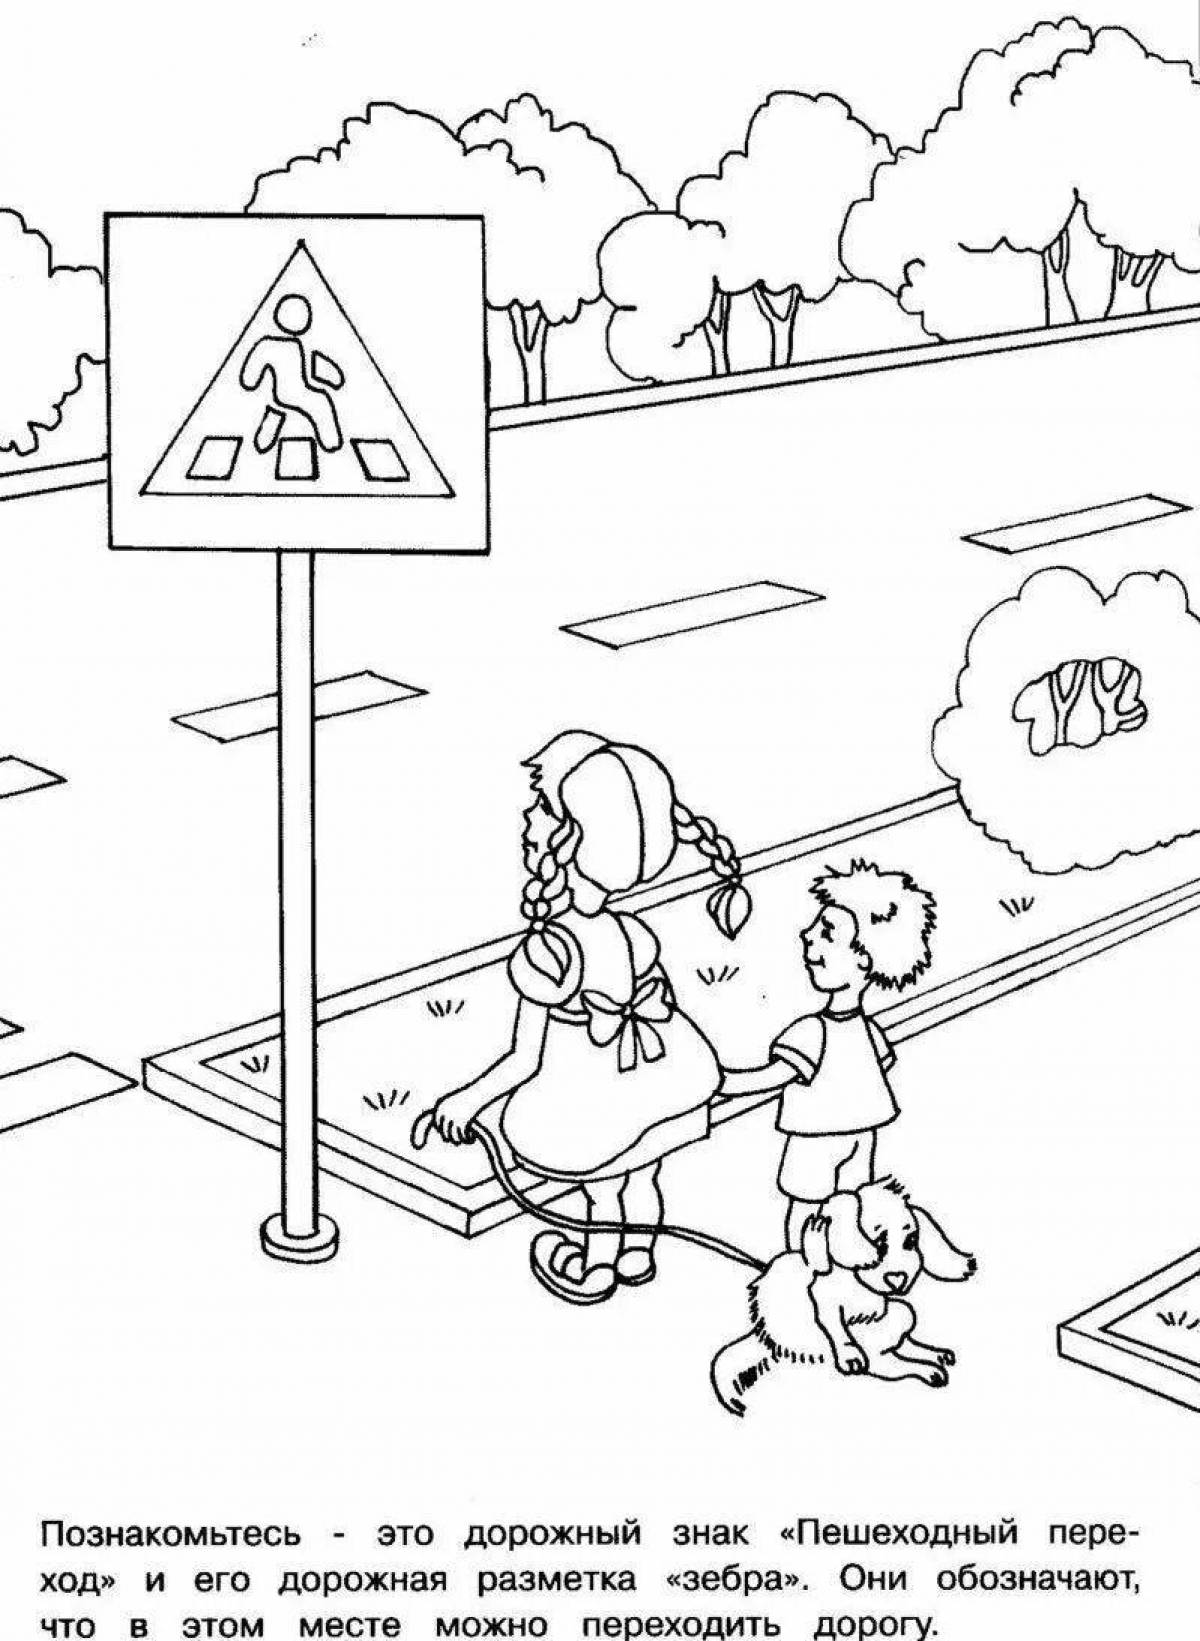 For children according to traffic rules for elementary school #15